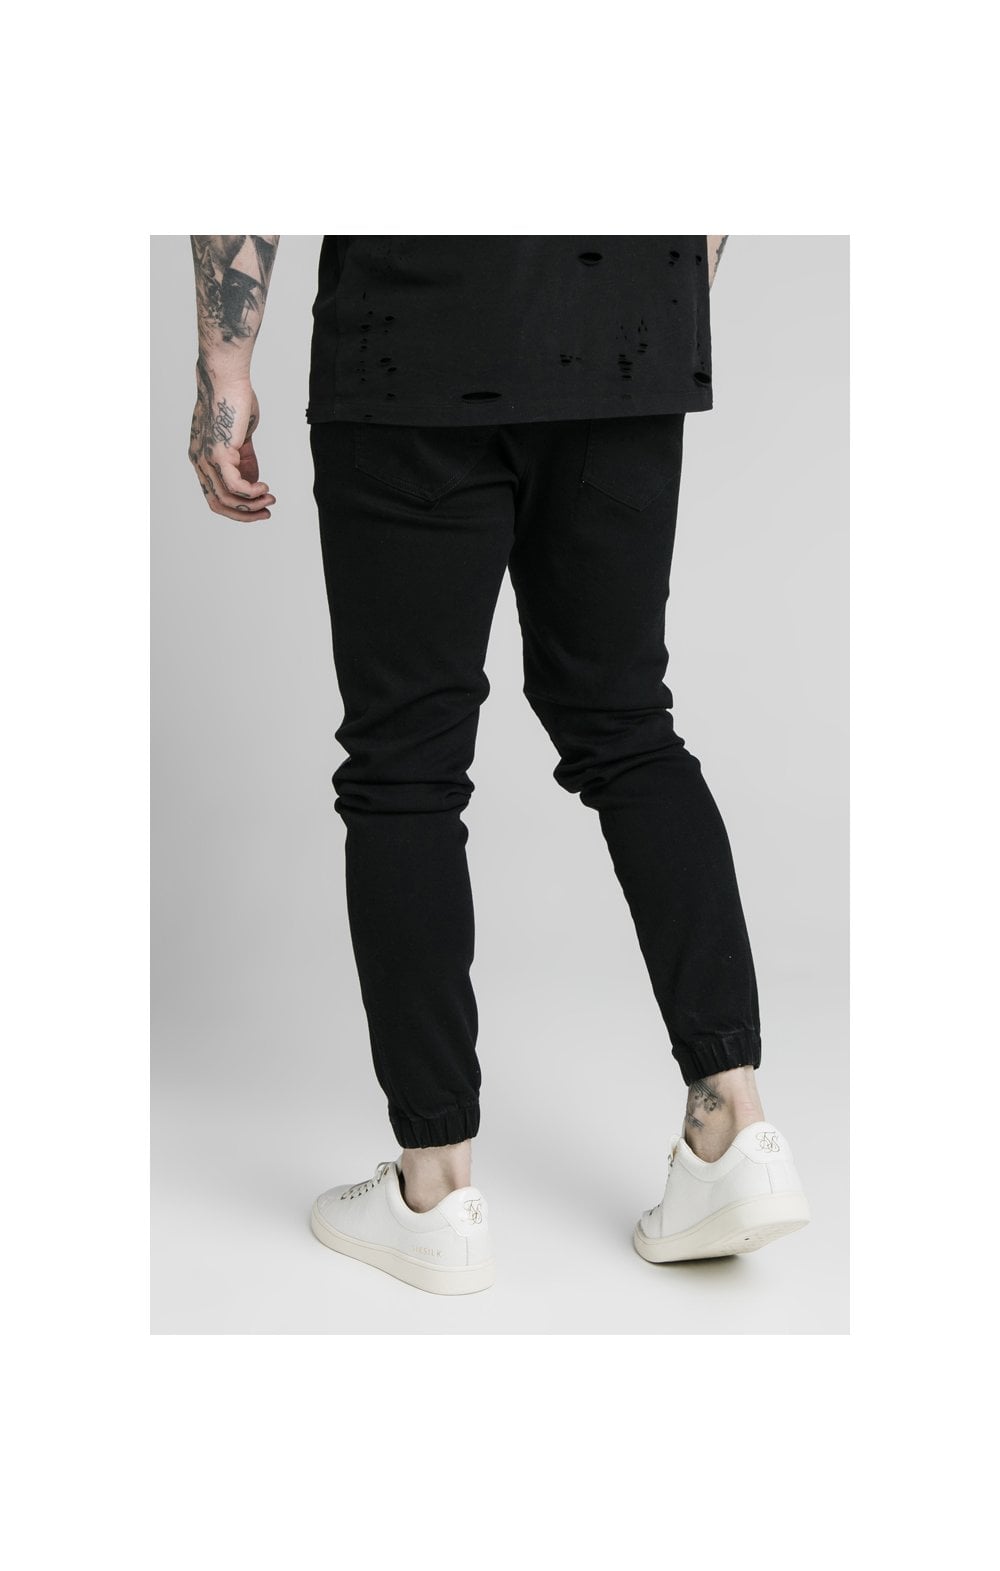 SikSilk Elasticated Cuff Pleated Jeans Pants - Washed Black (1)